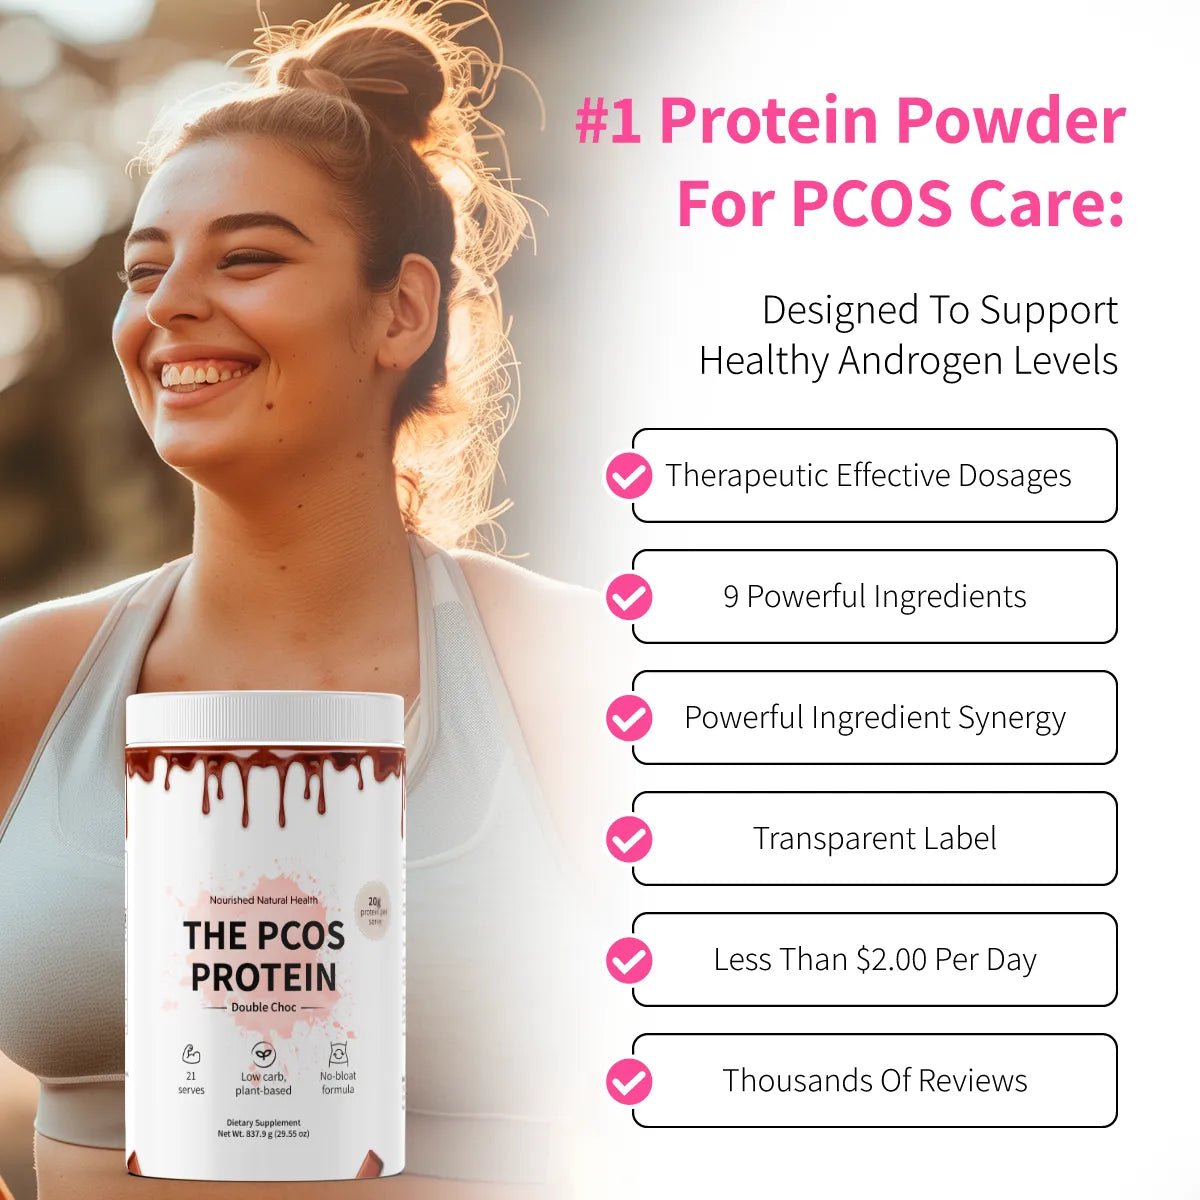 The PCOS Protein - Anti - androgenic, Low Carb, High Protein, Designed for Cysters - Nourished Natural Health